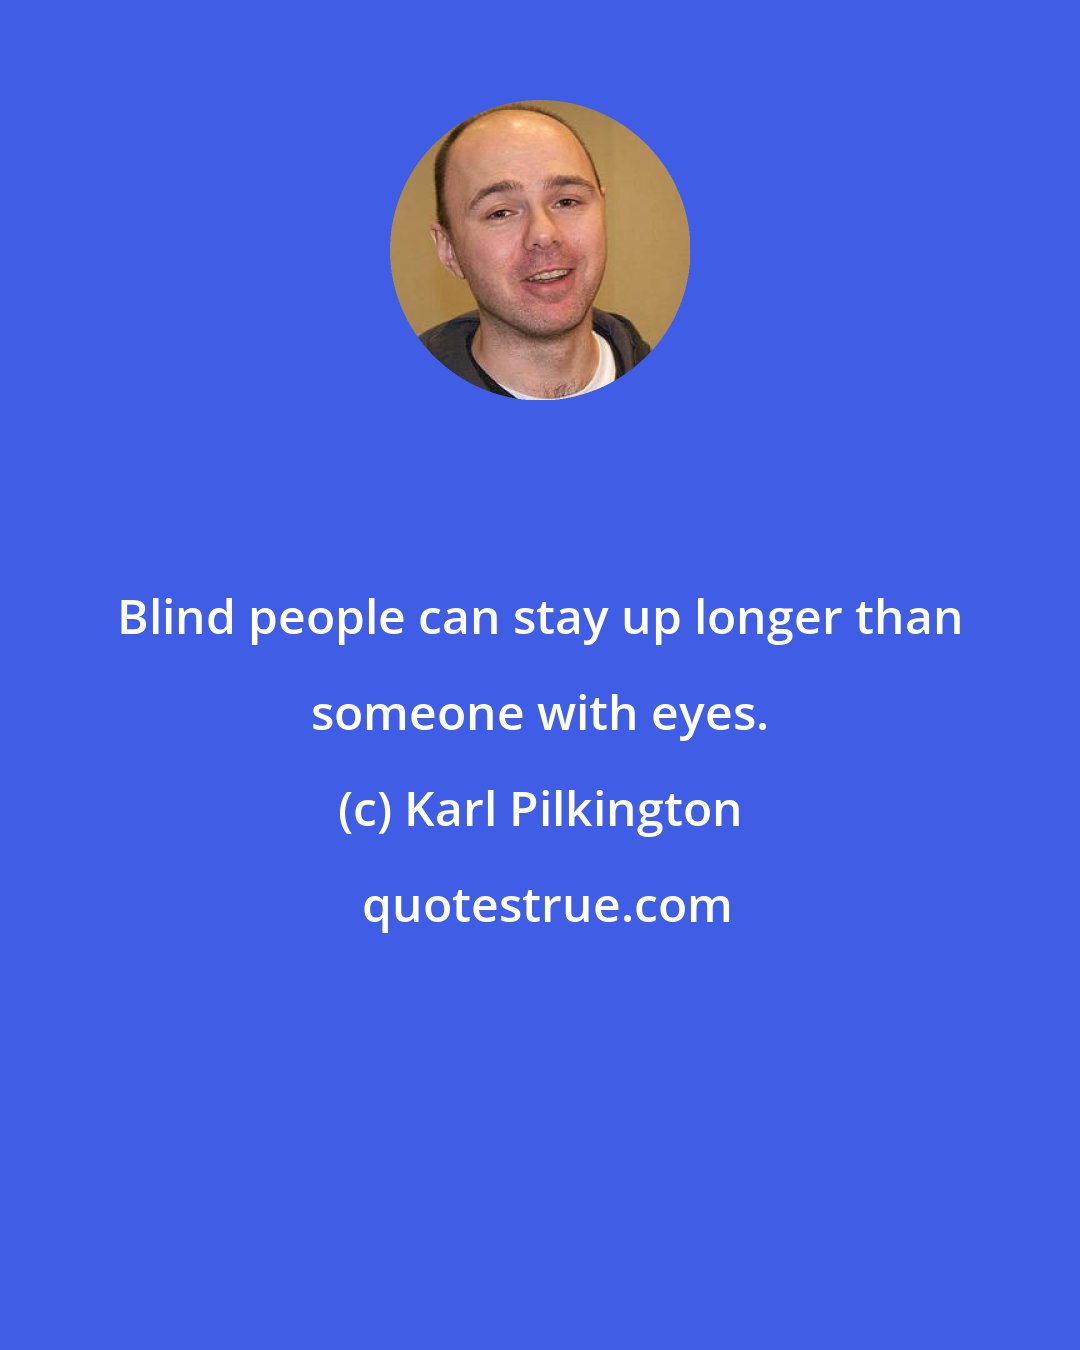 Karl Pilkington: Blind people can stay up longer than someone with eyes.